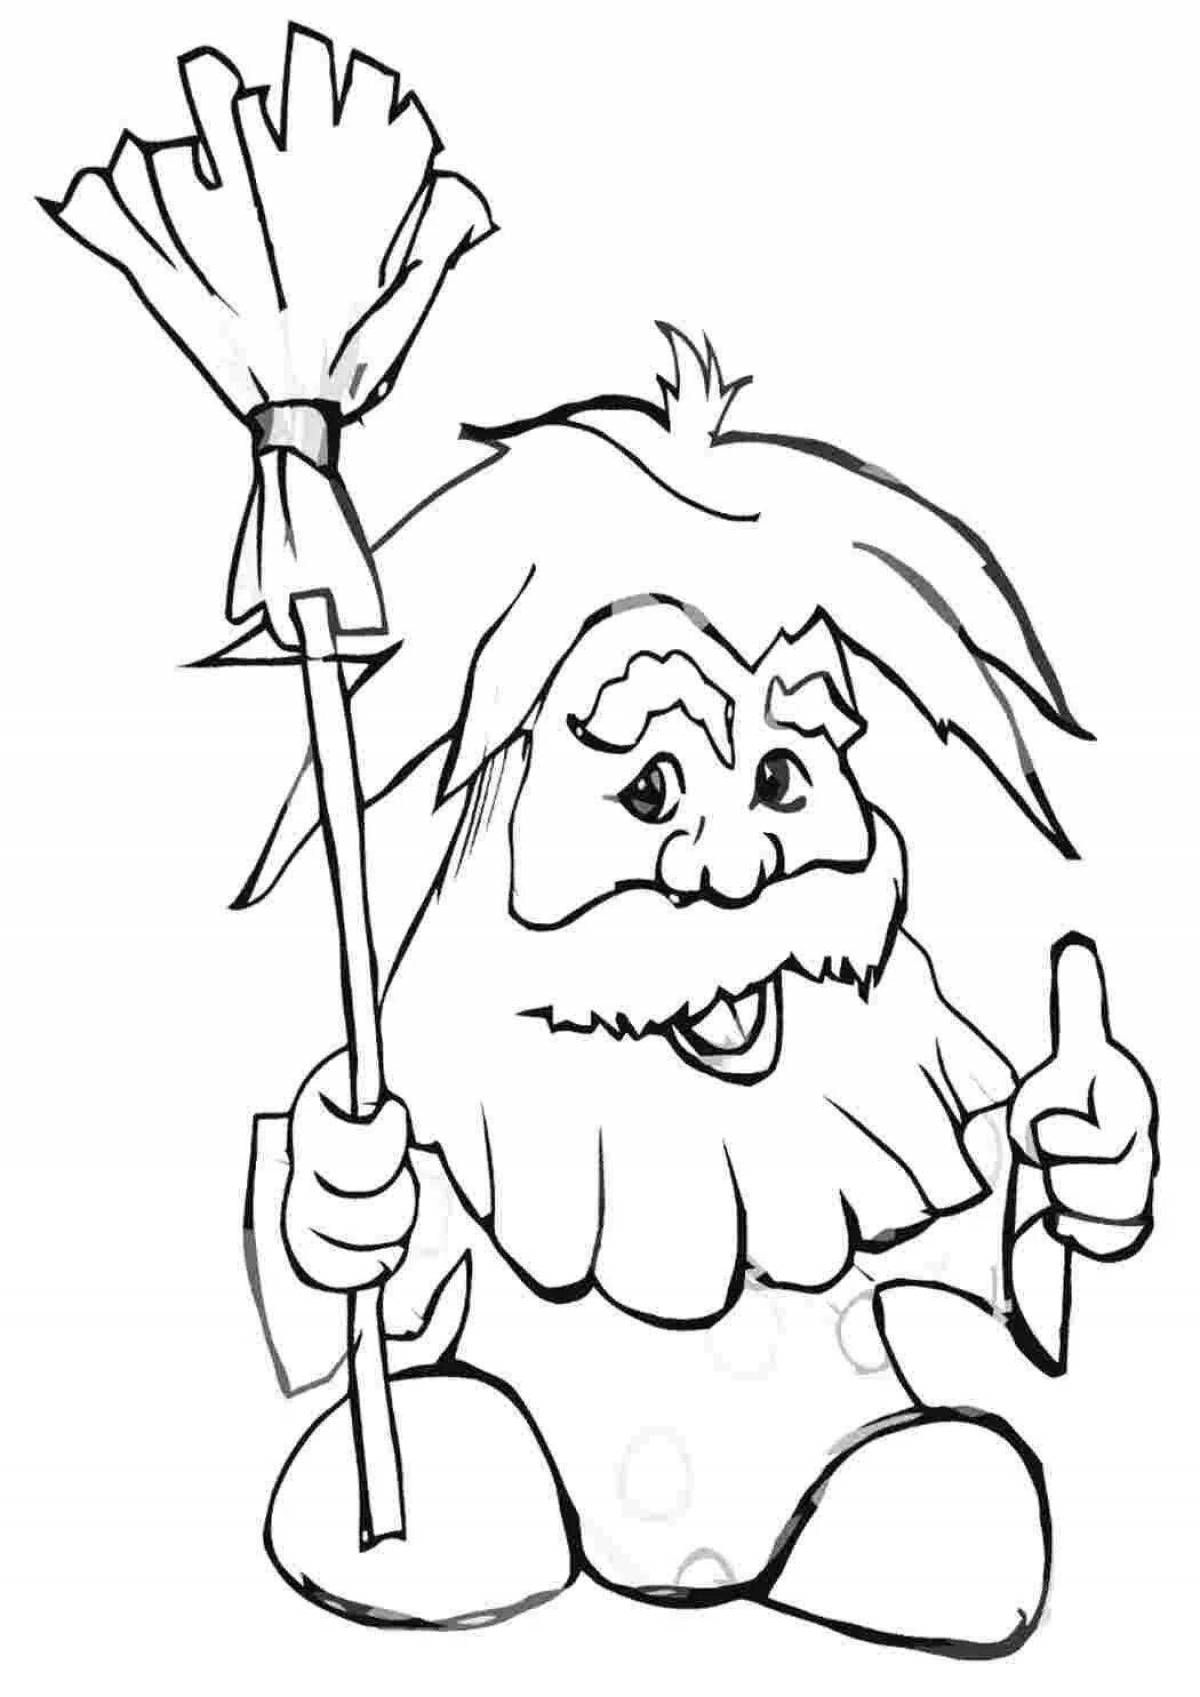 Animated goblin coloring page